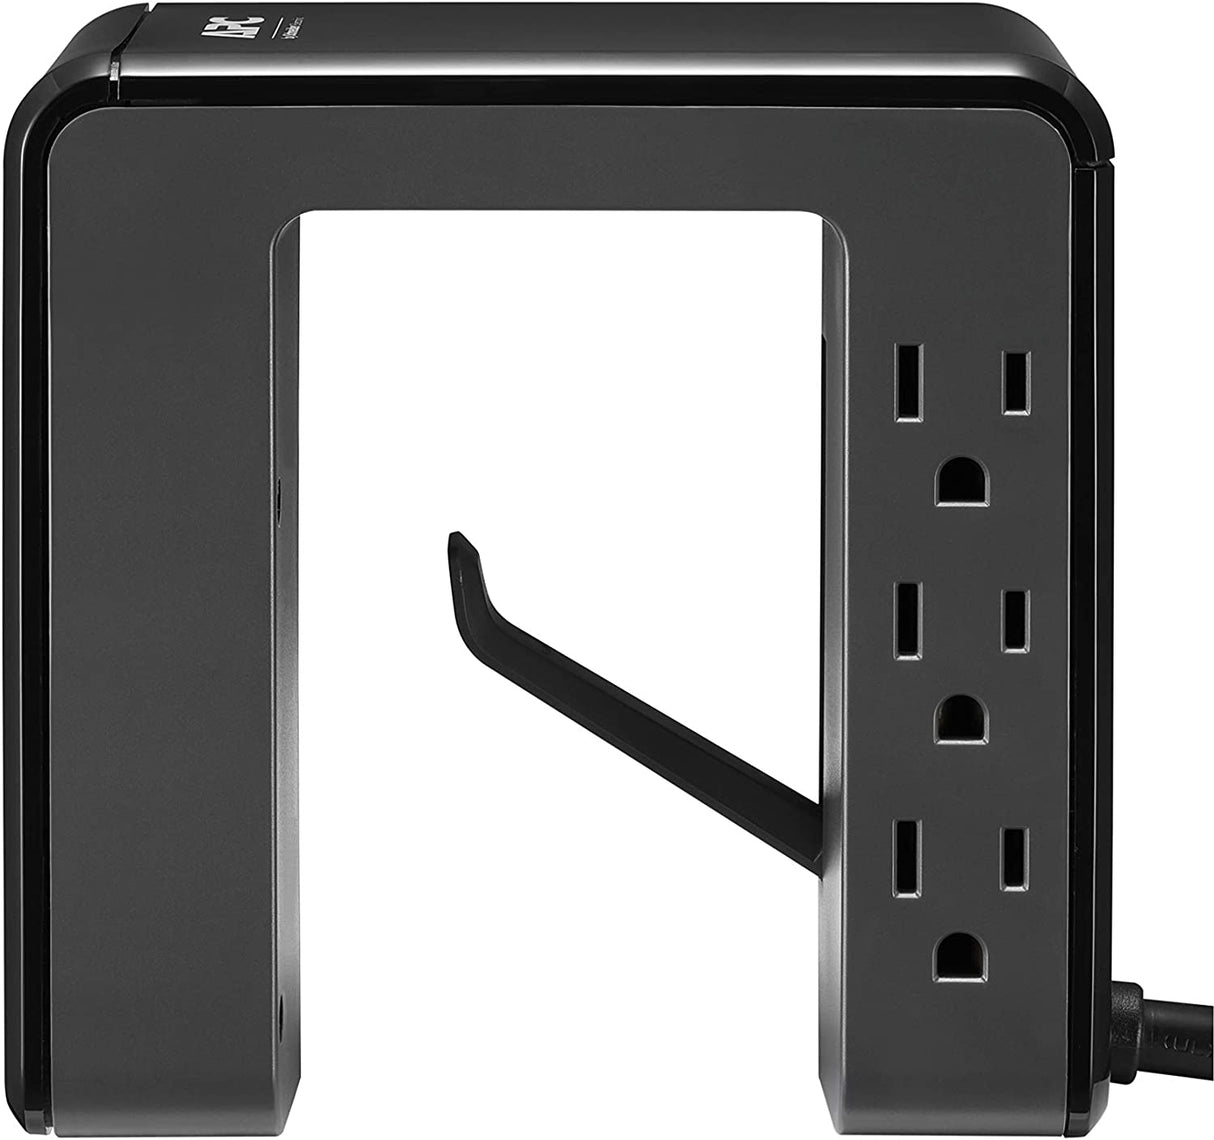 APC Desk Mount Power Station PE6U4, U-Shaped Surge Protector with USB Ports (4), Desk Clamp, 6 Outlet, 1080 Joules Black Black 4 USB Charging Ports (Type A only) Outlet